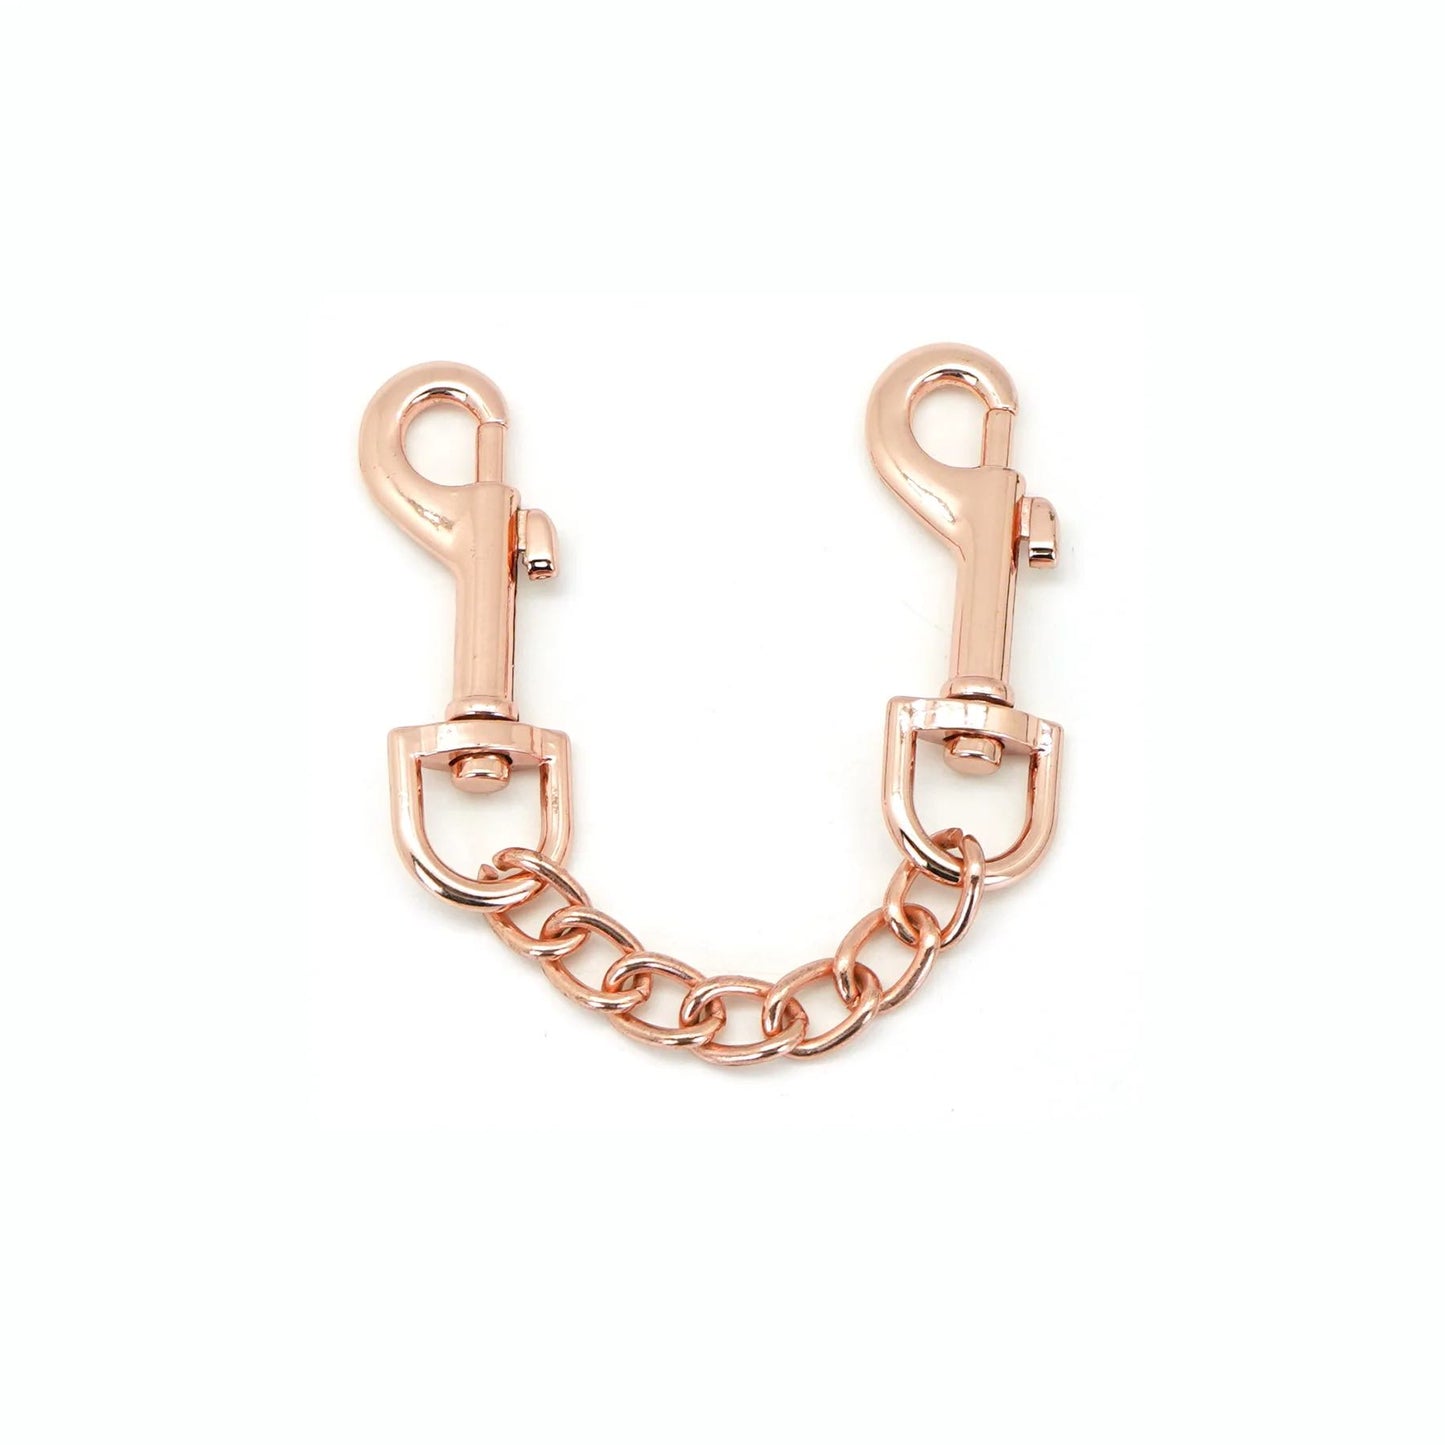 The rose gold connecting chain for the Rose Gold Memory Leather Cuffs with Faux Fur LIning.